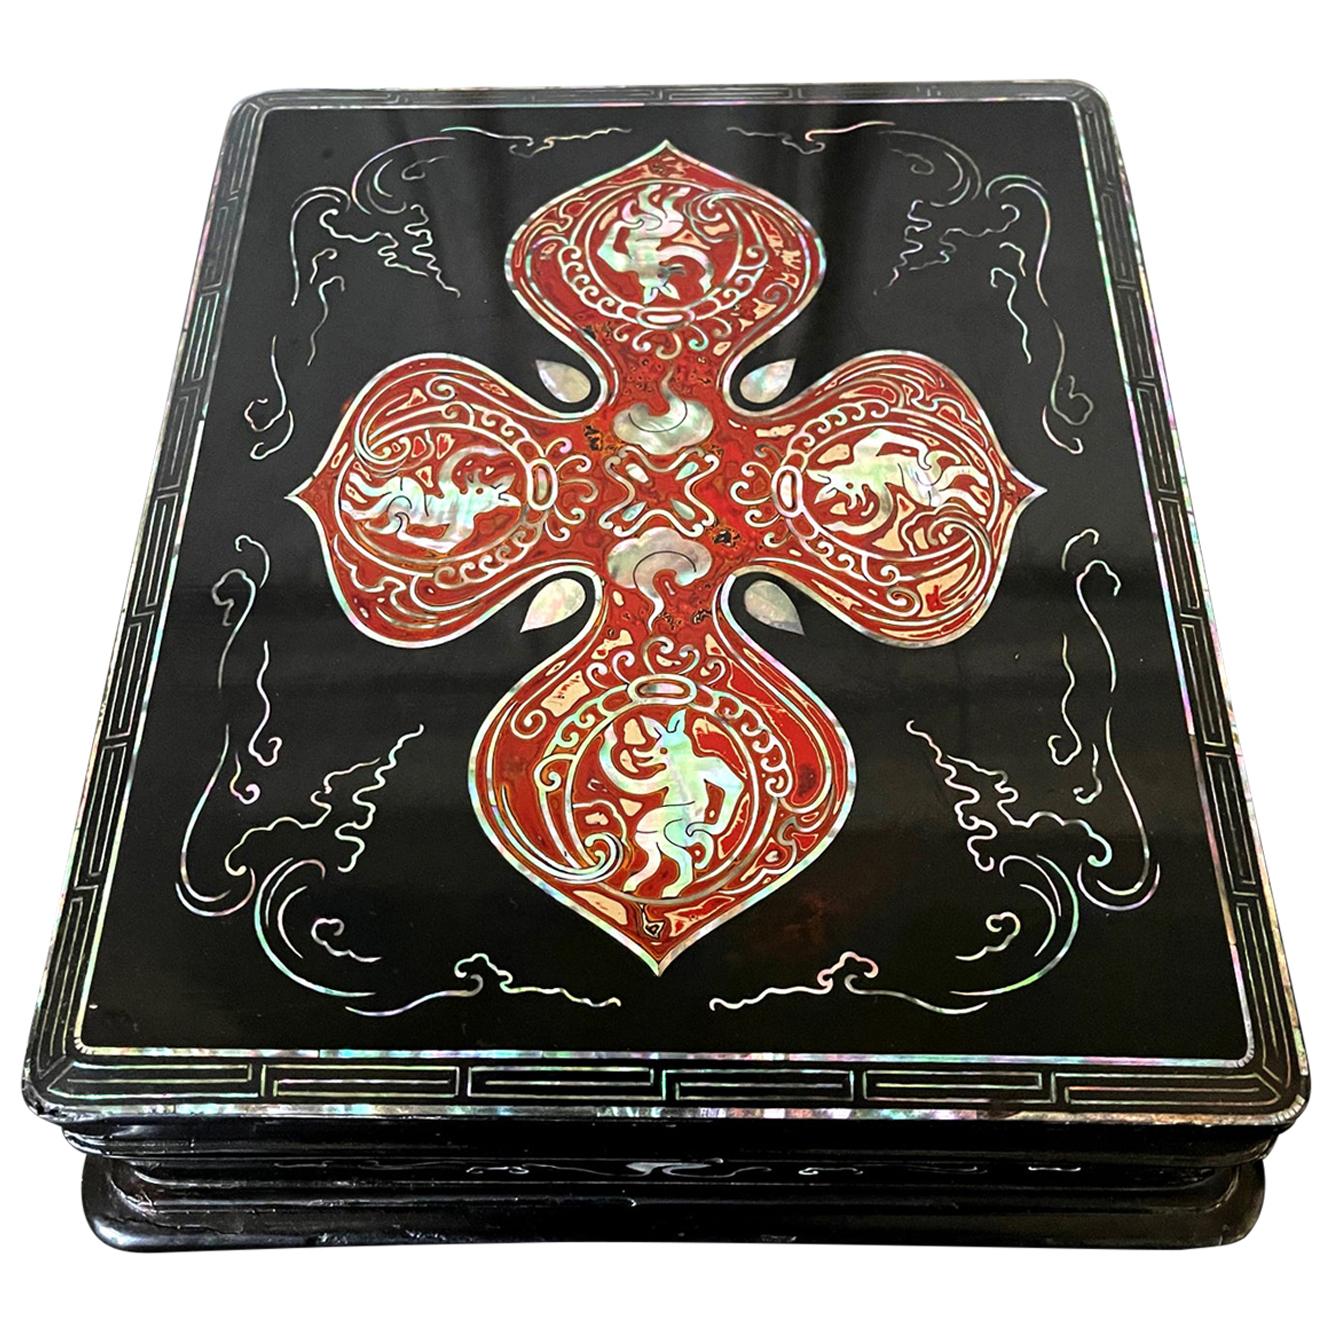 Unusual Japanese Lacquer Inkstone Box with MOP Inlays